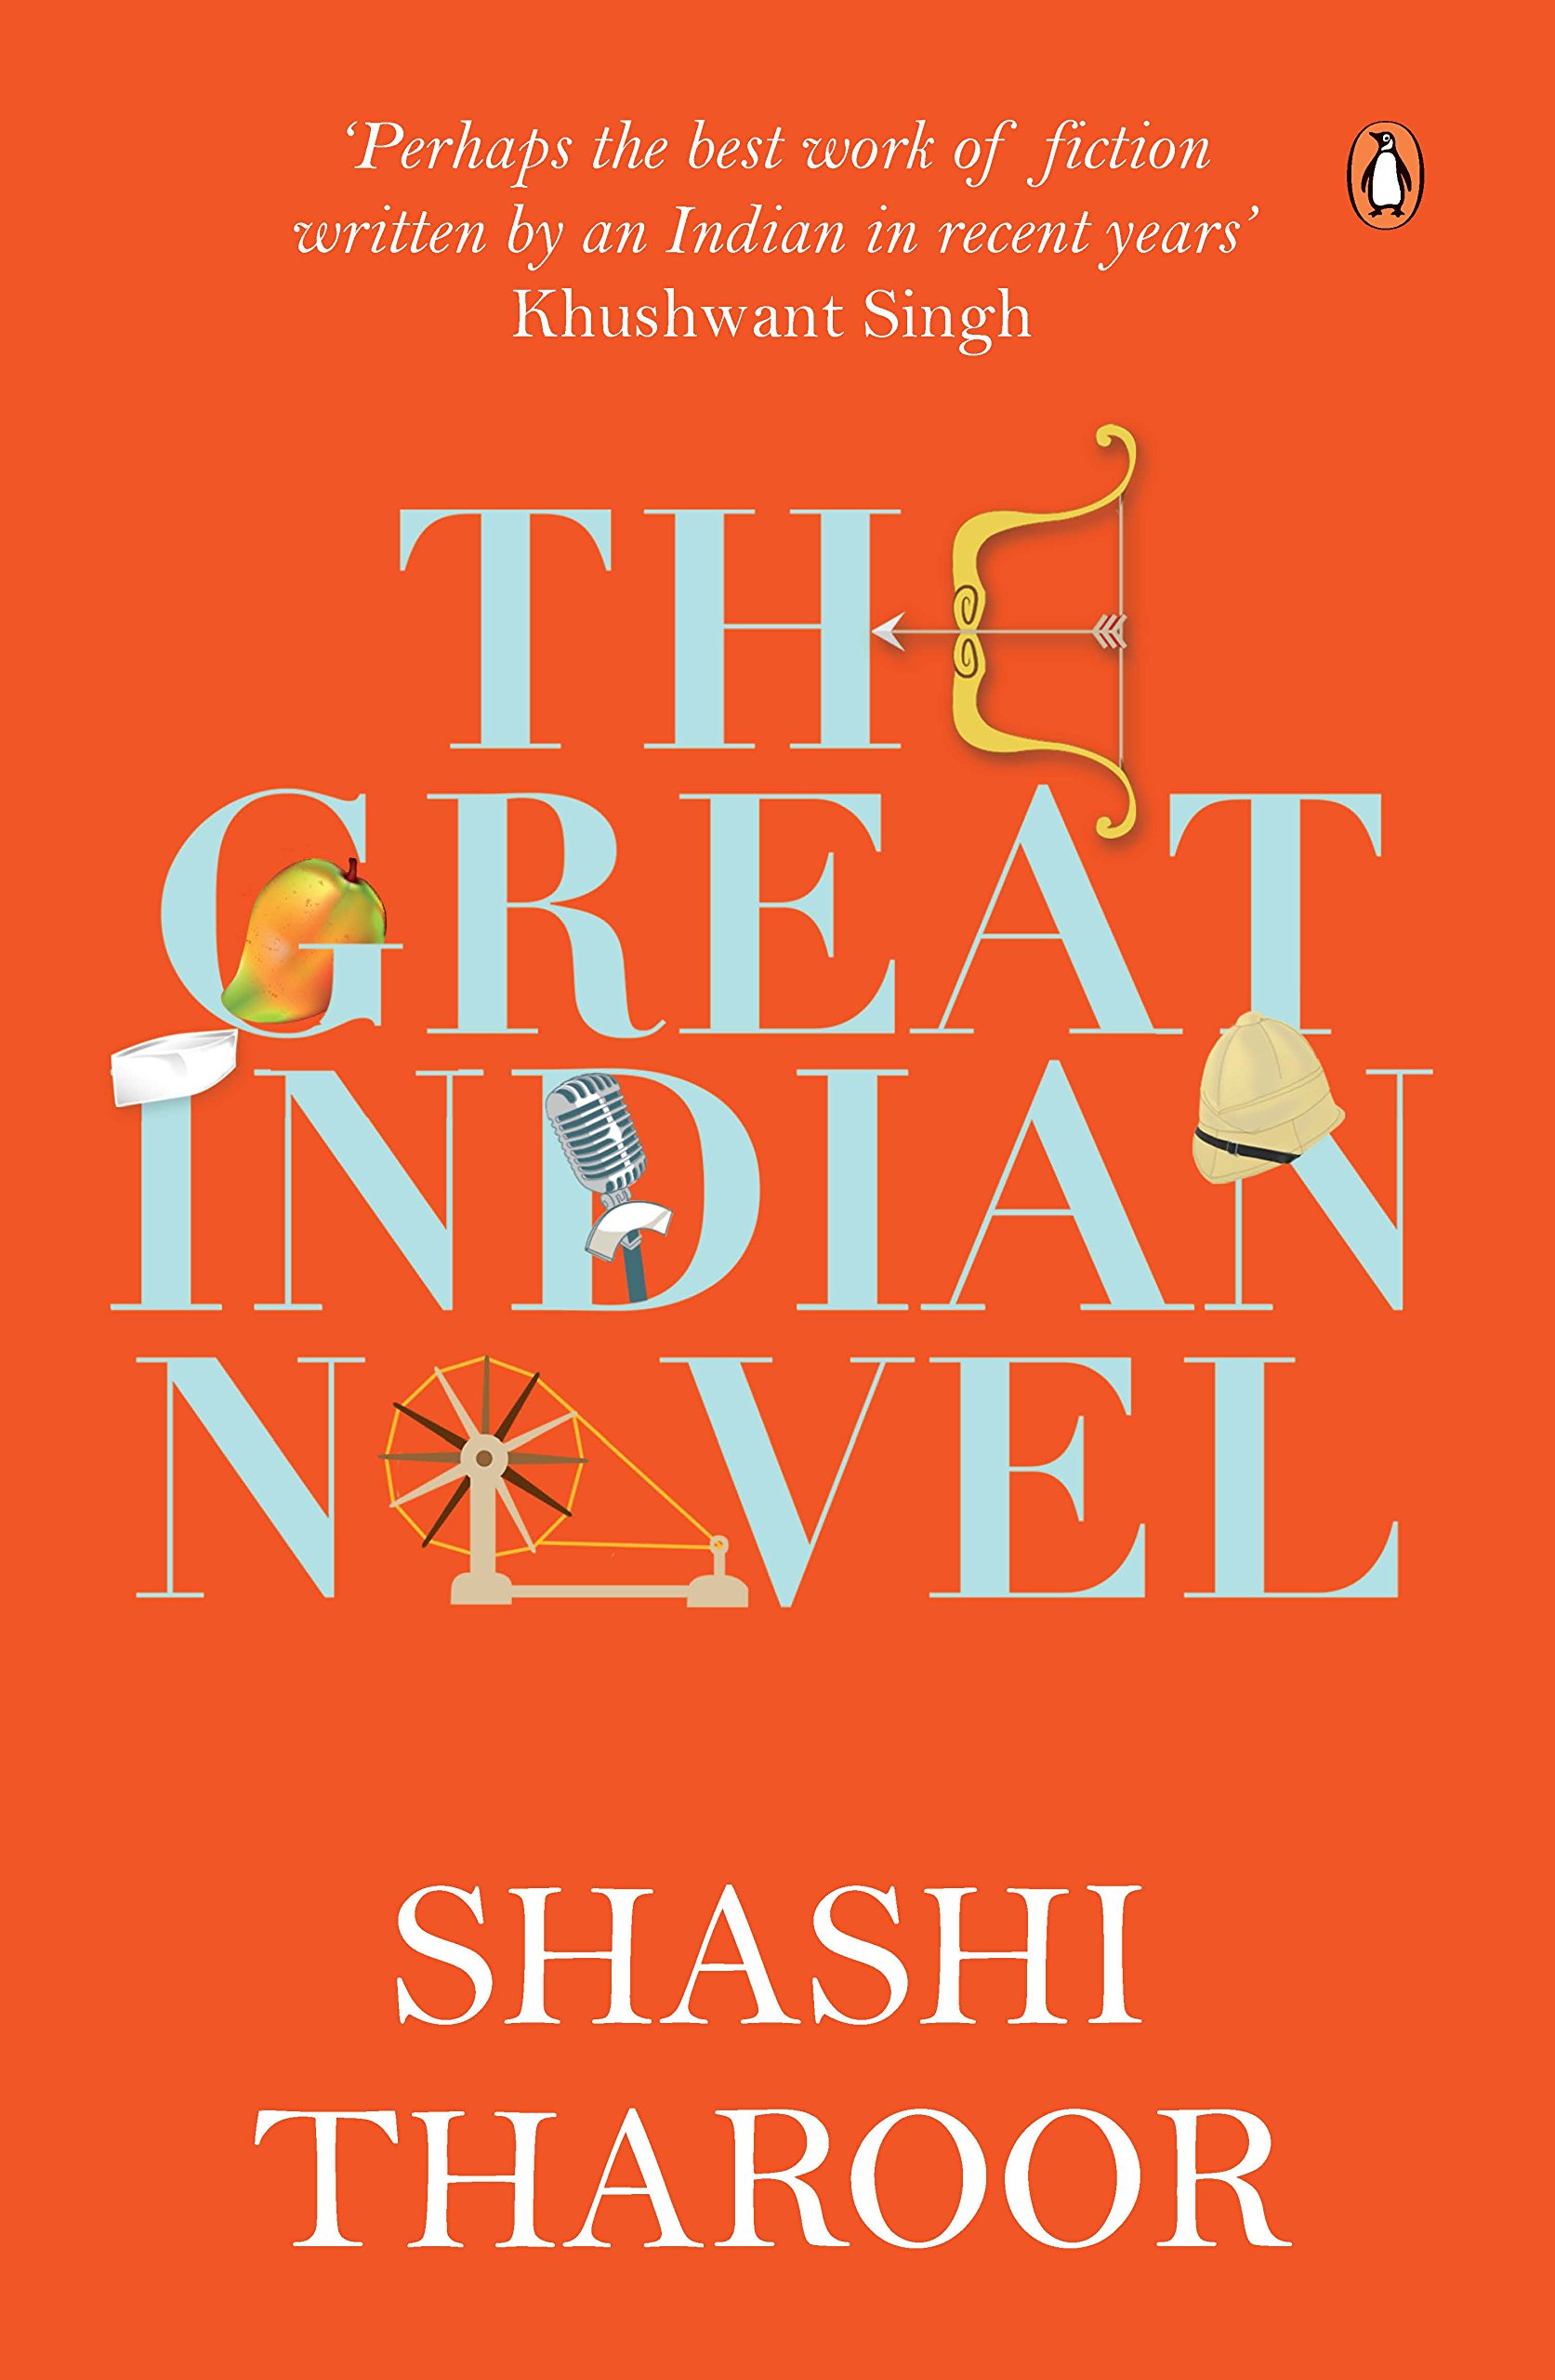 15 BestSelling Books Of All Time By Indian Authors That You Should Read